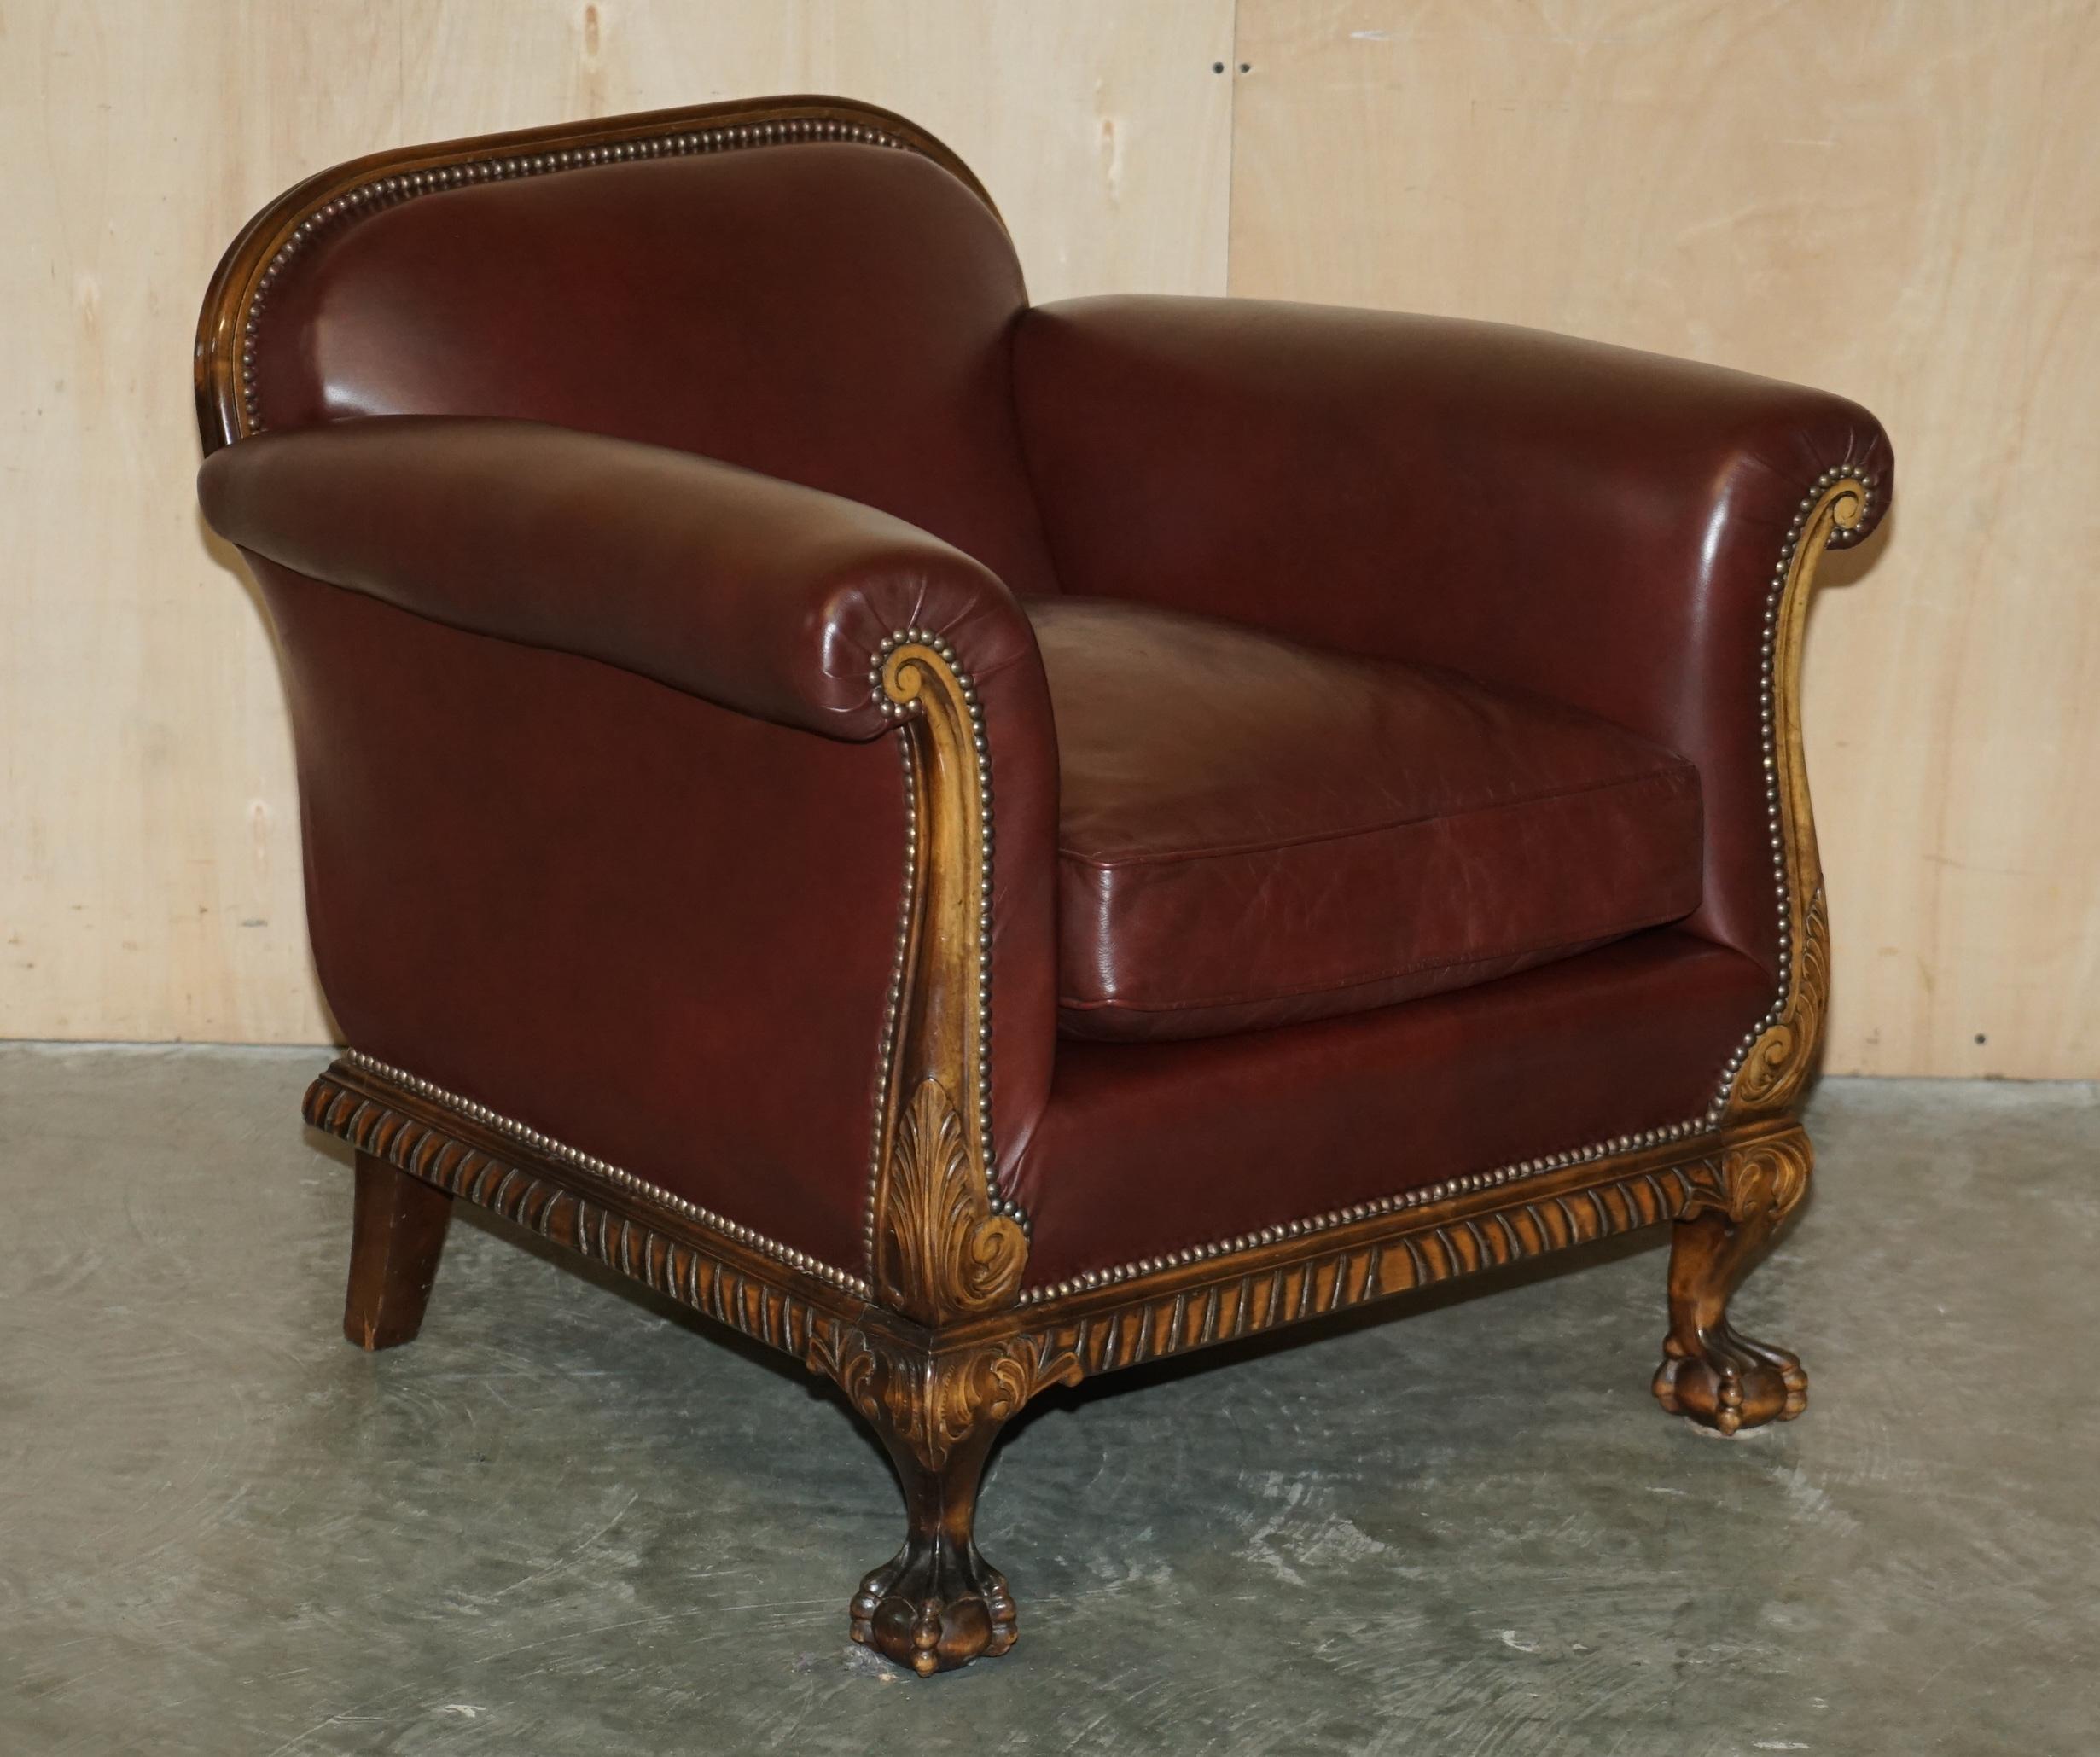 We are delighted to offer for sale this stunning pair of Antique Victorian circa 1880 hand made in England armchairs with hand carved walnut claw & ball feet feather filled cushions.

A good looking, well made and decorative pair, they are also